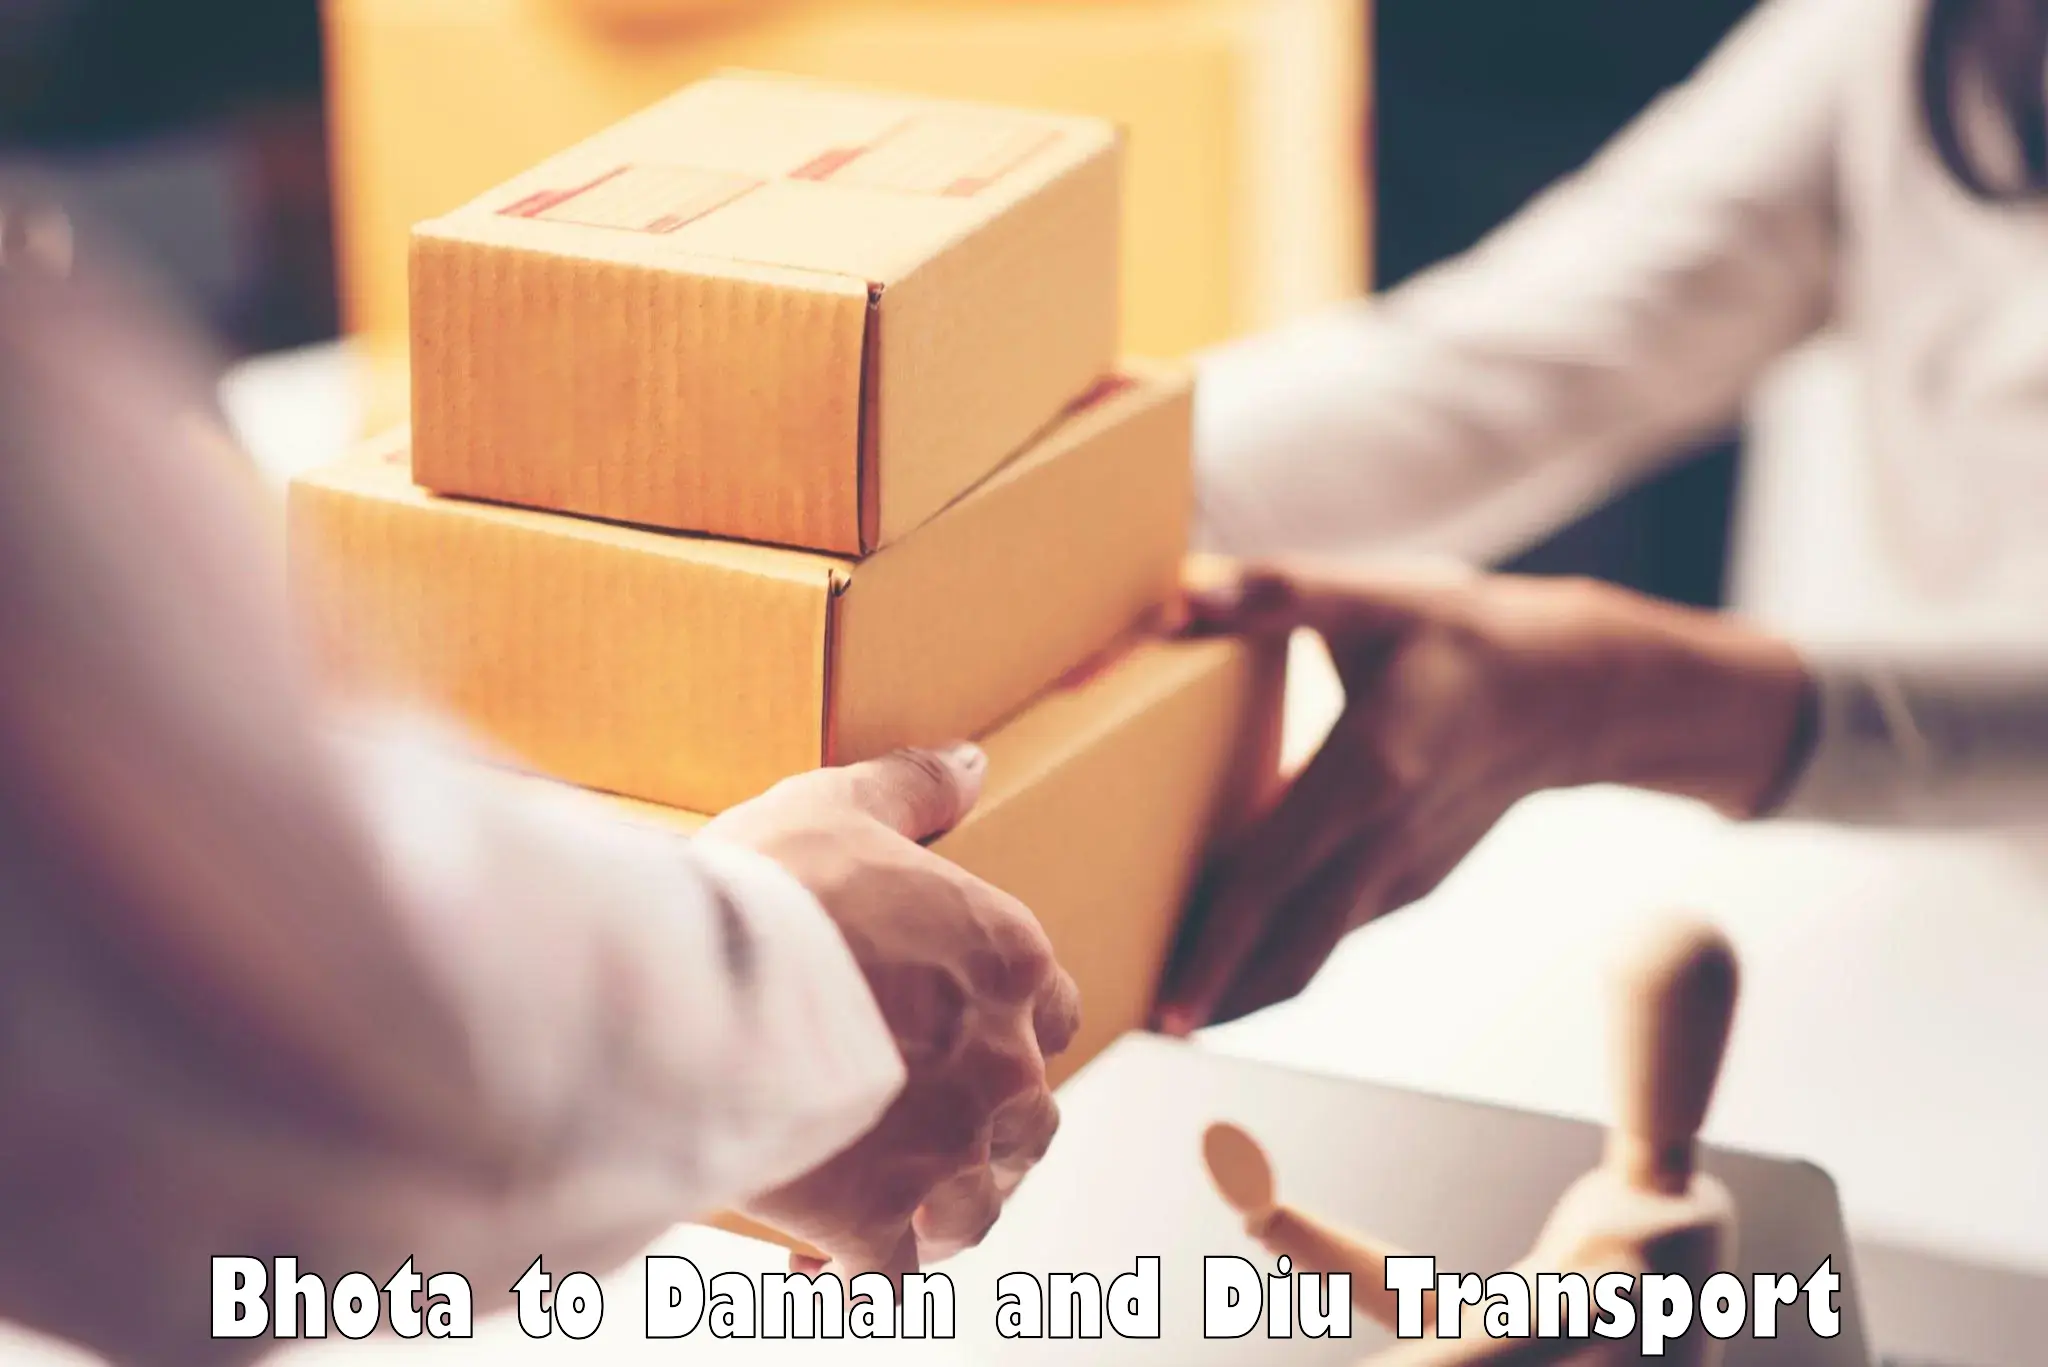 Commercial transport service Bhota to Diu